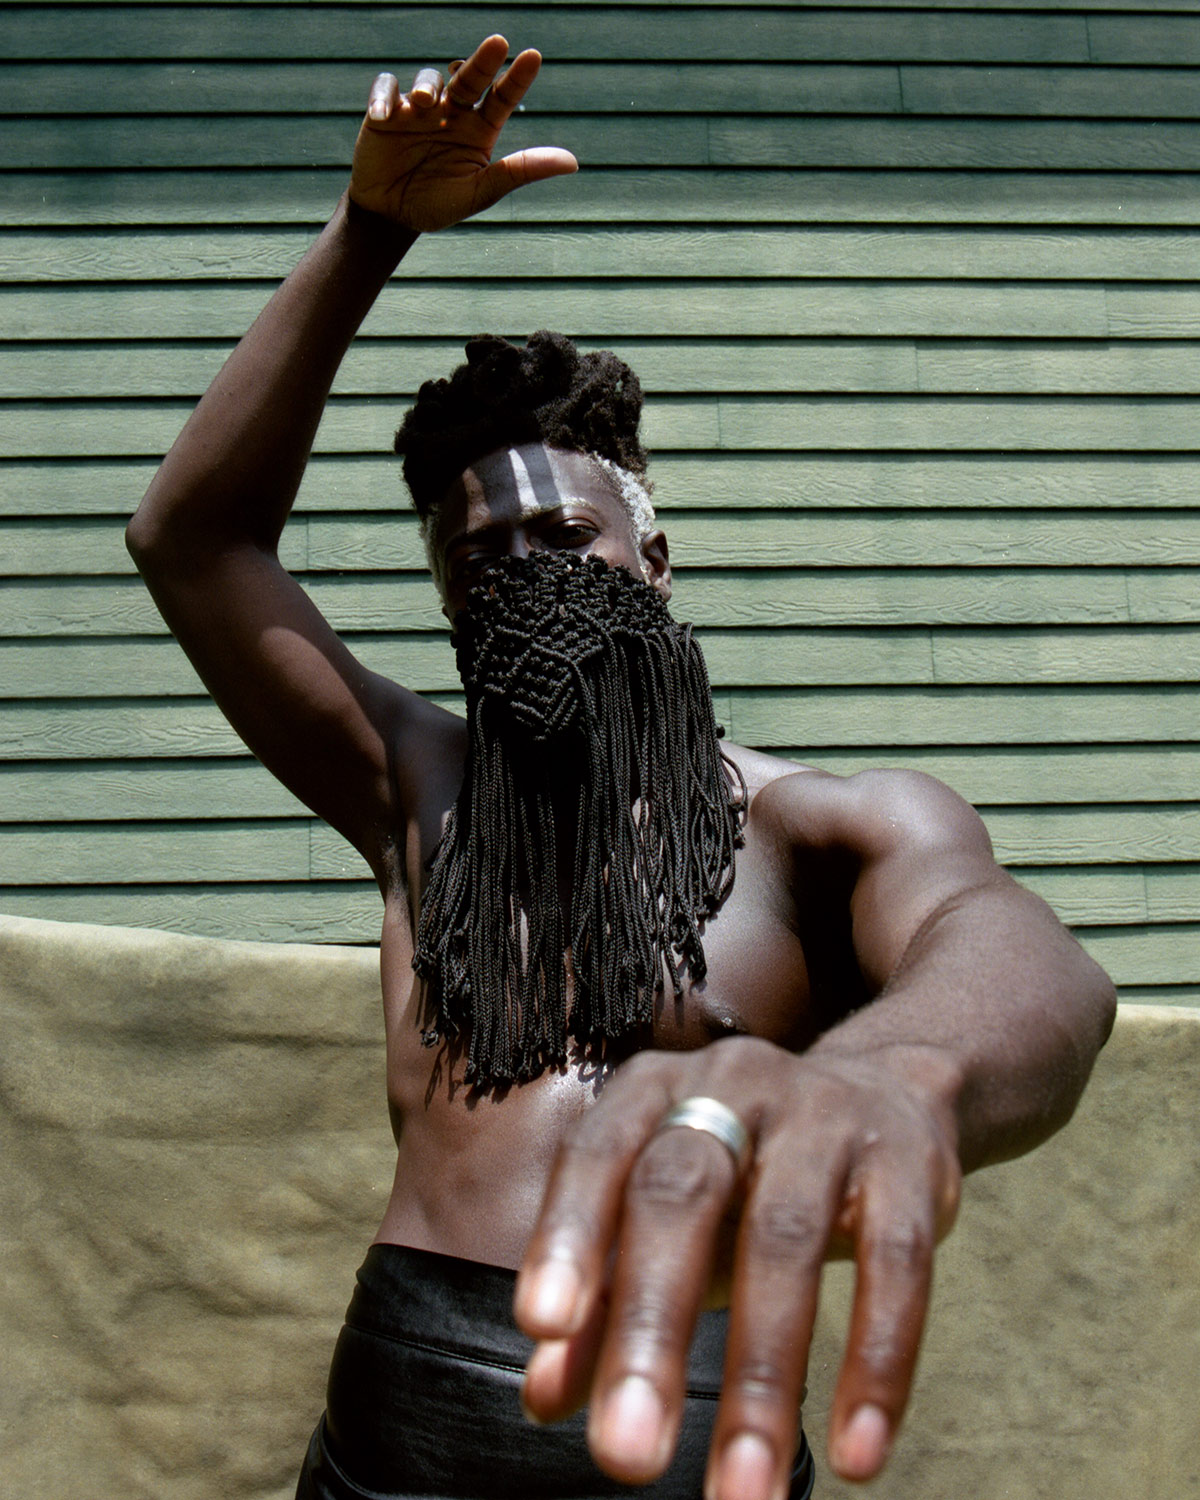 In A World Obsessed With Romance, Moses Sumney Is Happy Alone